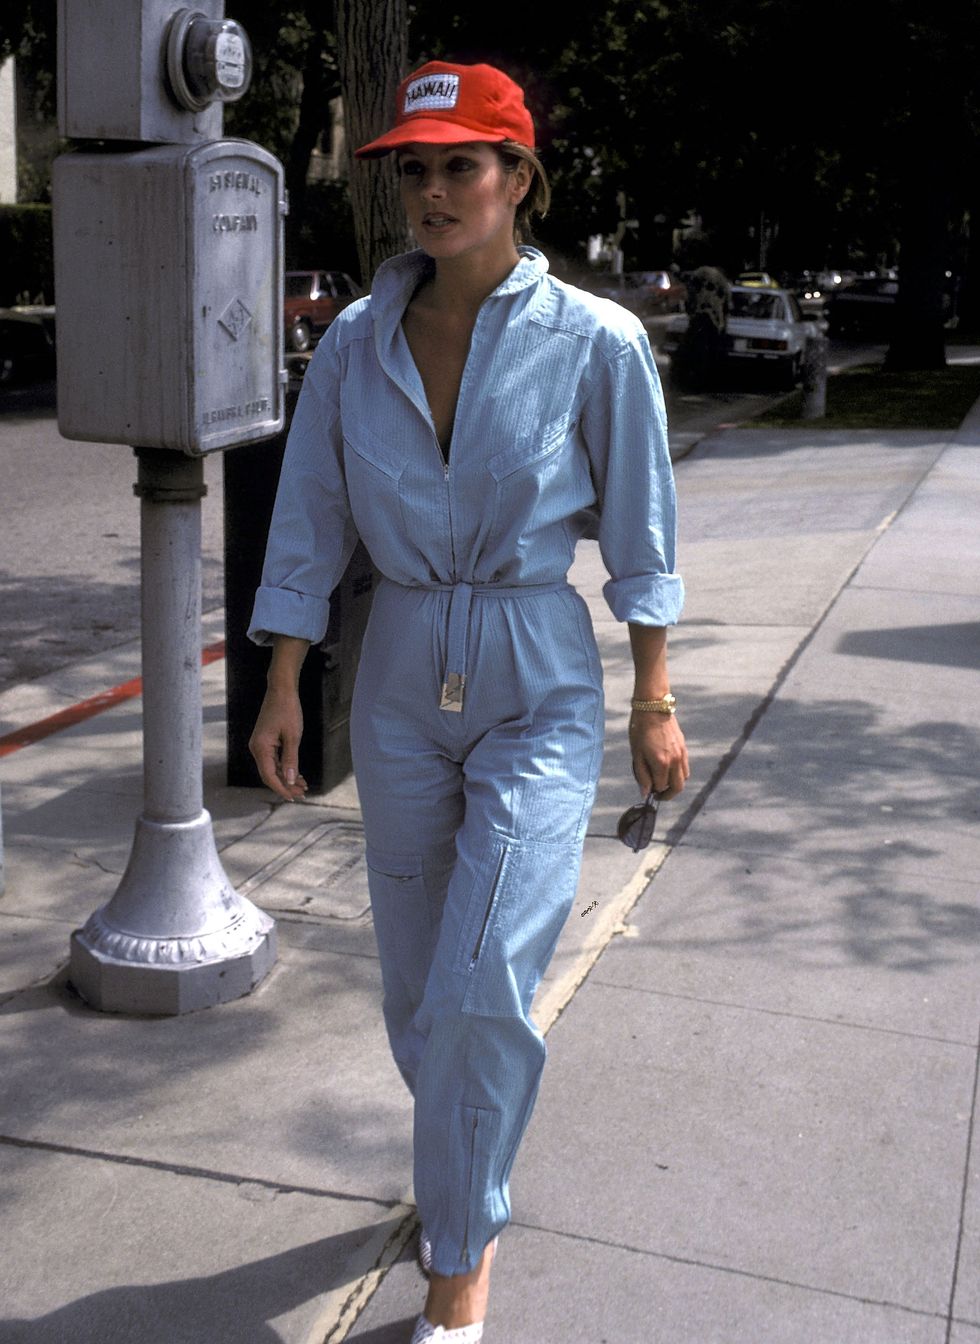 beverly hills, ca april 24 priscilla presley breaks from filming the pilot of the new abc television program those amazing animals on april 24, 1980 at wilshire boulevard in beverly hills, california photo by ron galellaron galella collection via getty images